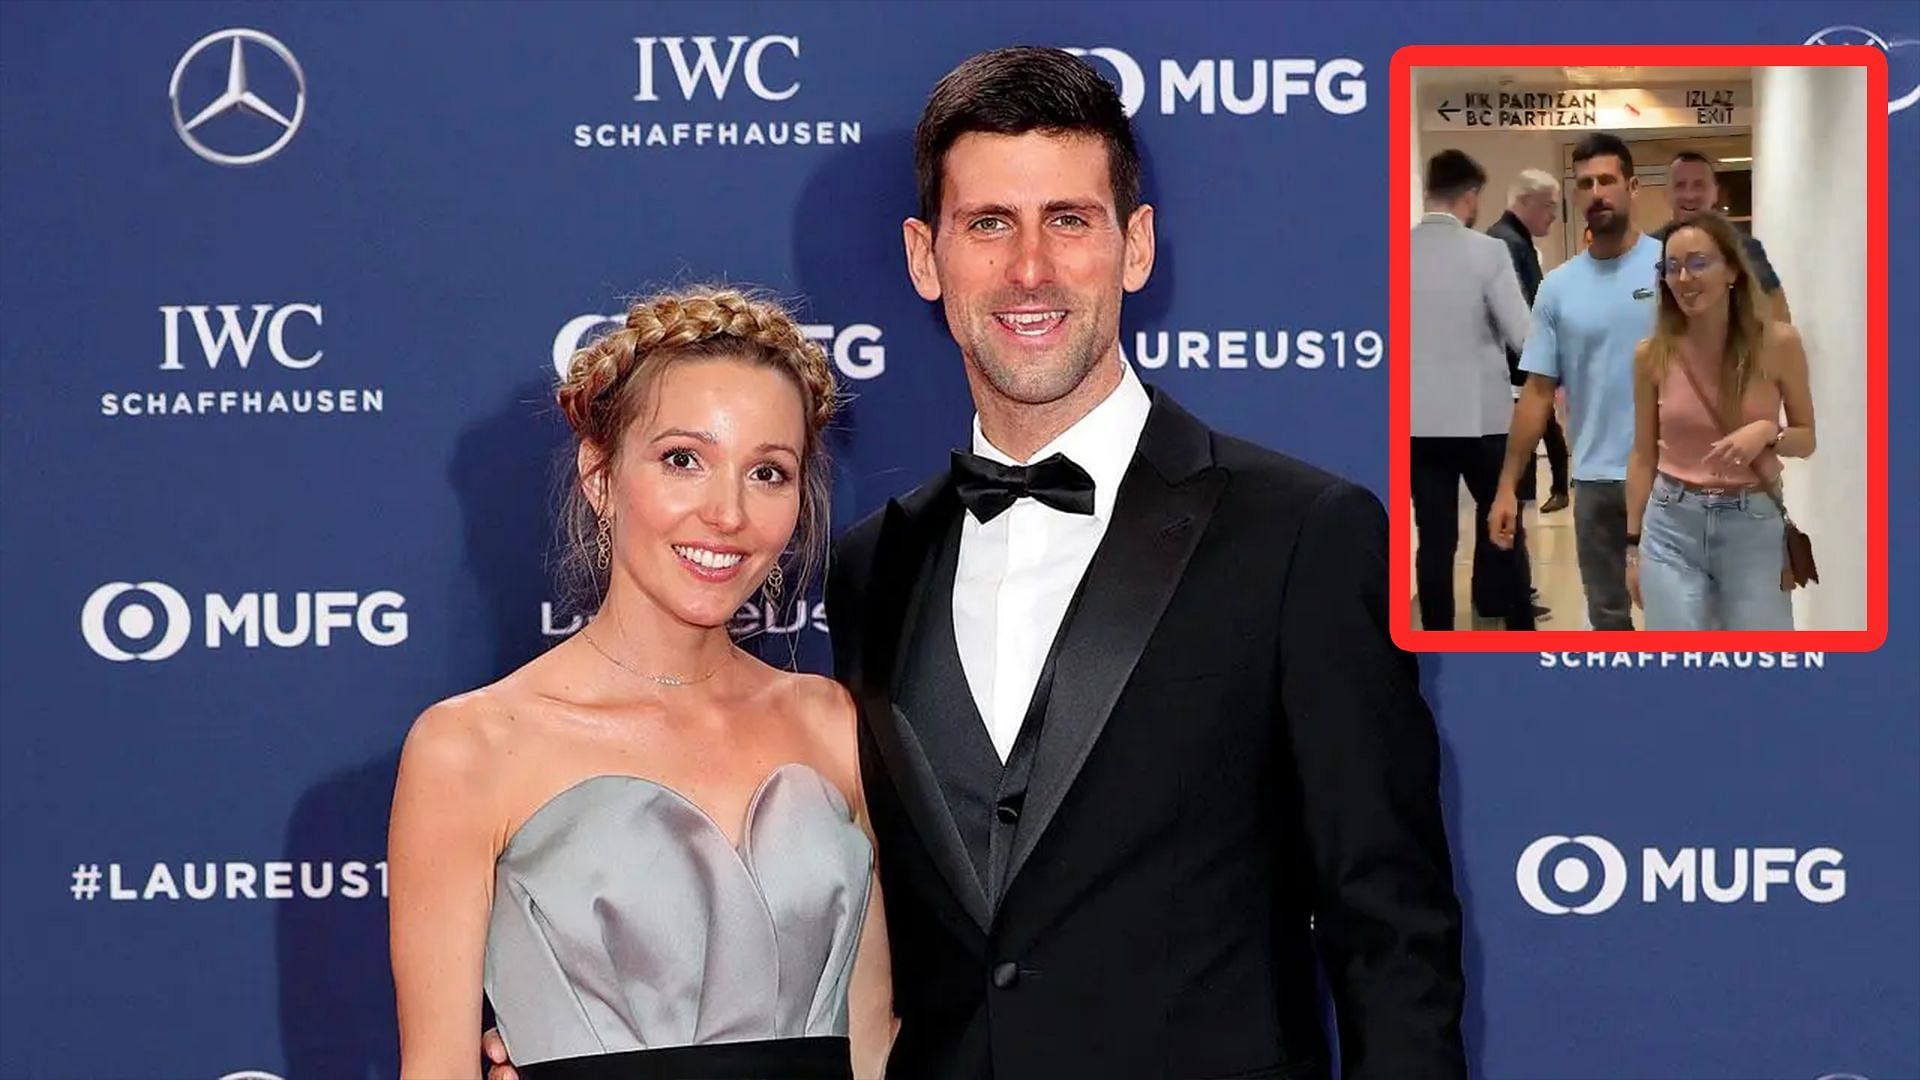 WATCH: Novak Djokovic makes the most of his off days with wife Jelena; attends ABA League final in Serbia before Geneva Open appearance